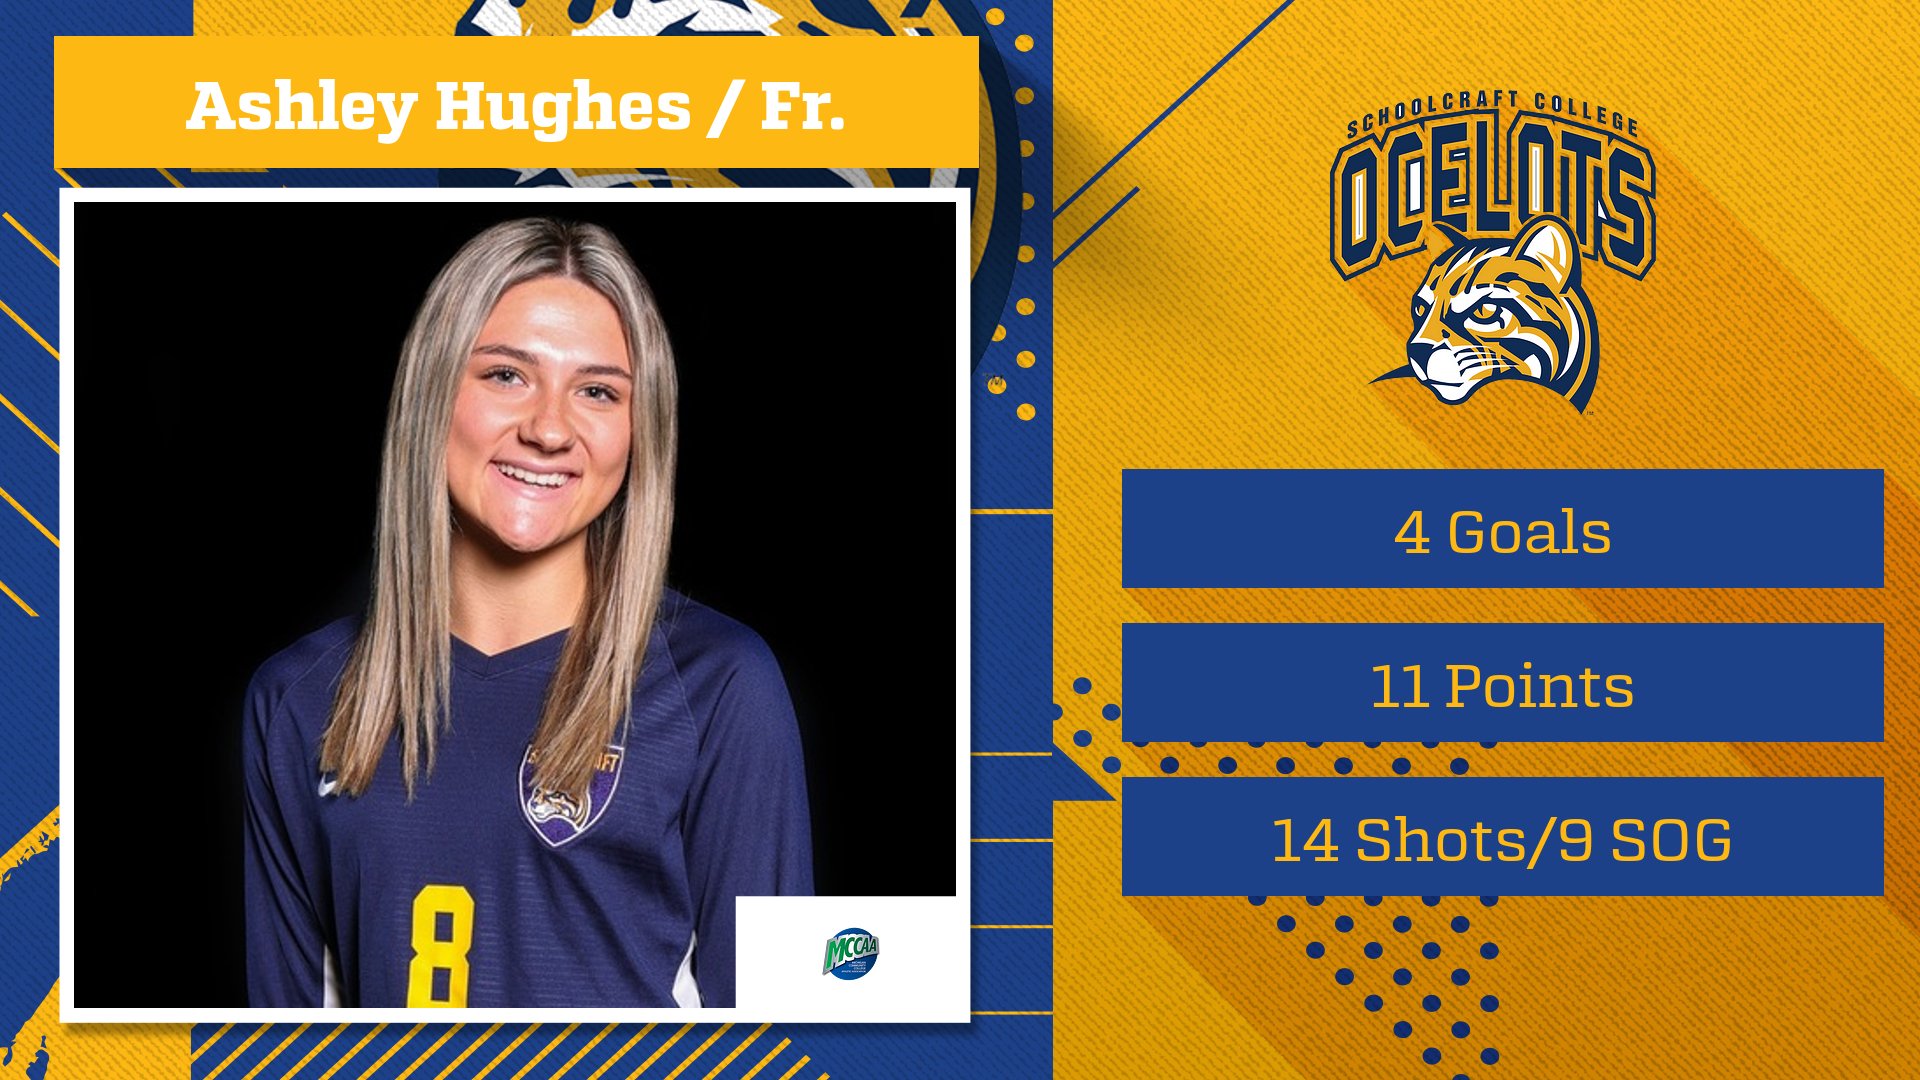 Schoolcraft's Hughes Claims MCCAA Women's Soccer Player of the Week#5